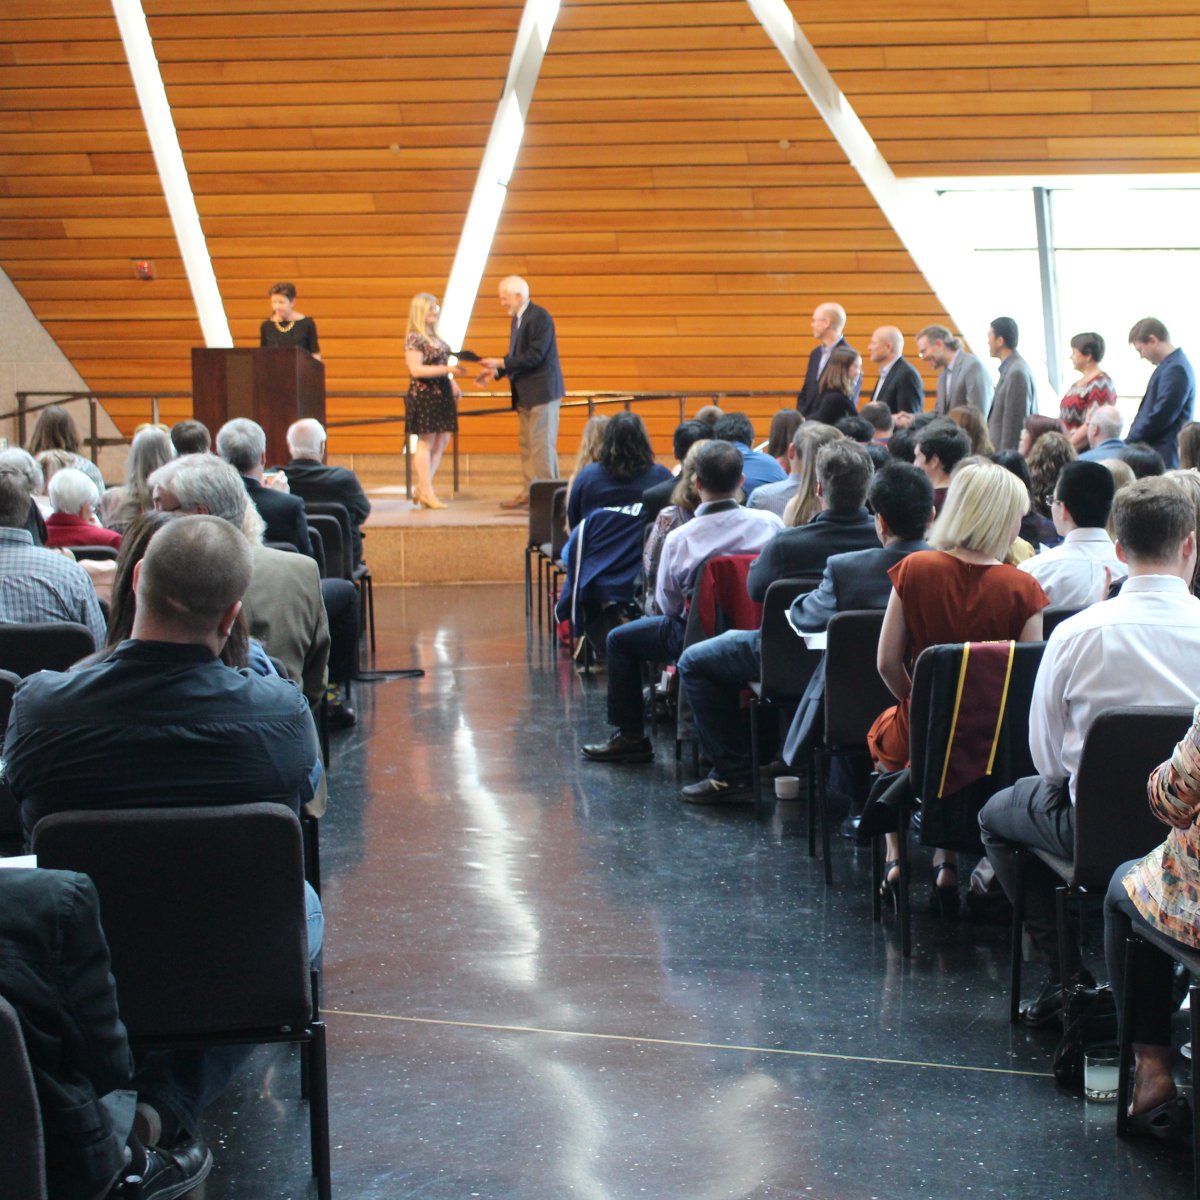 Photo of BME's undergraduate commencement reception; shows a student on stage with a faculty member, in front of an audience